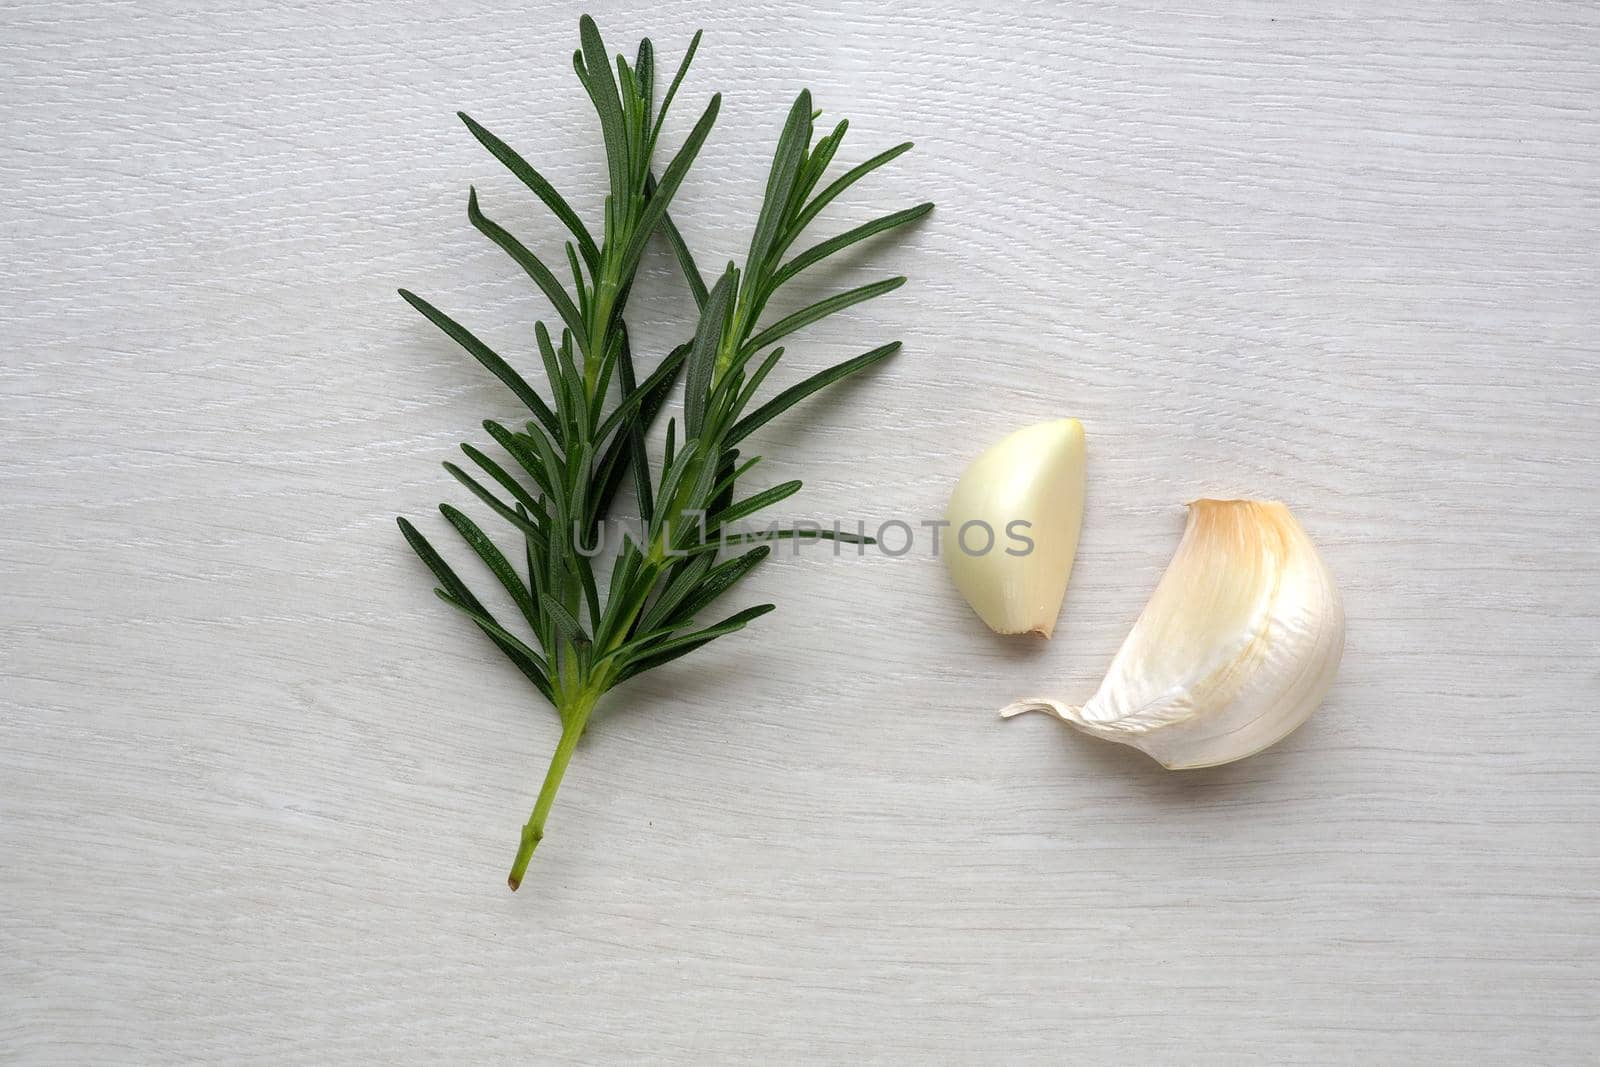 garlic clove and rosemary on white background by fivepointsix